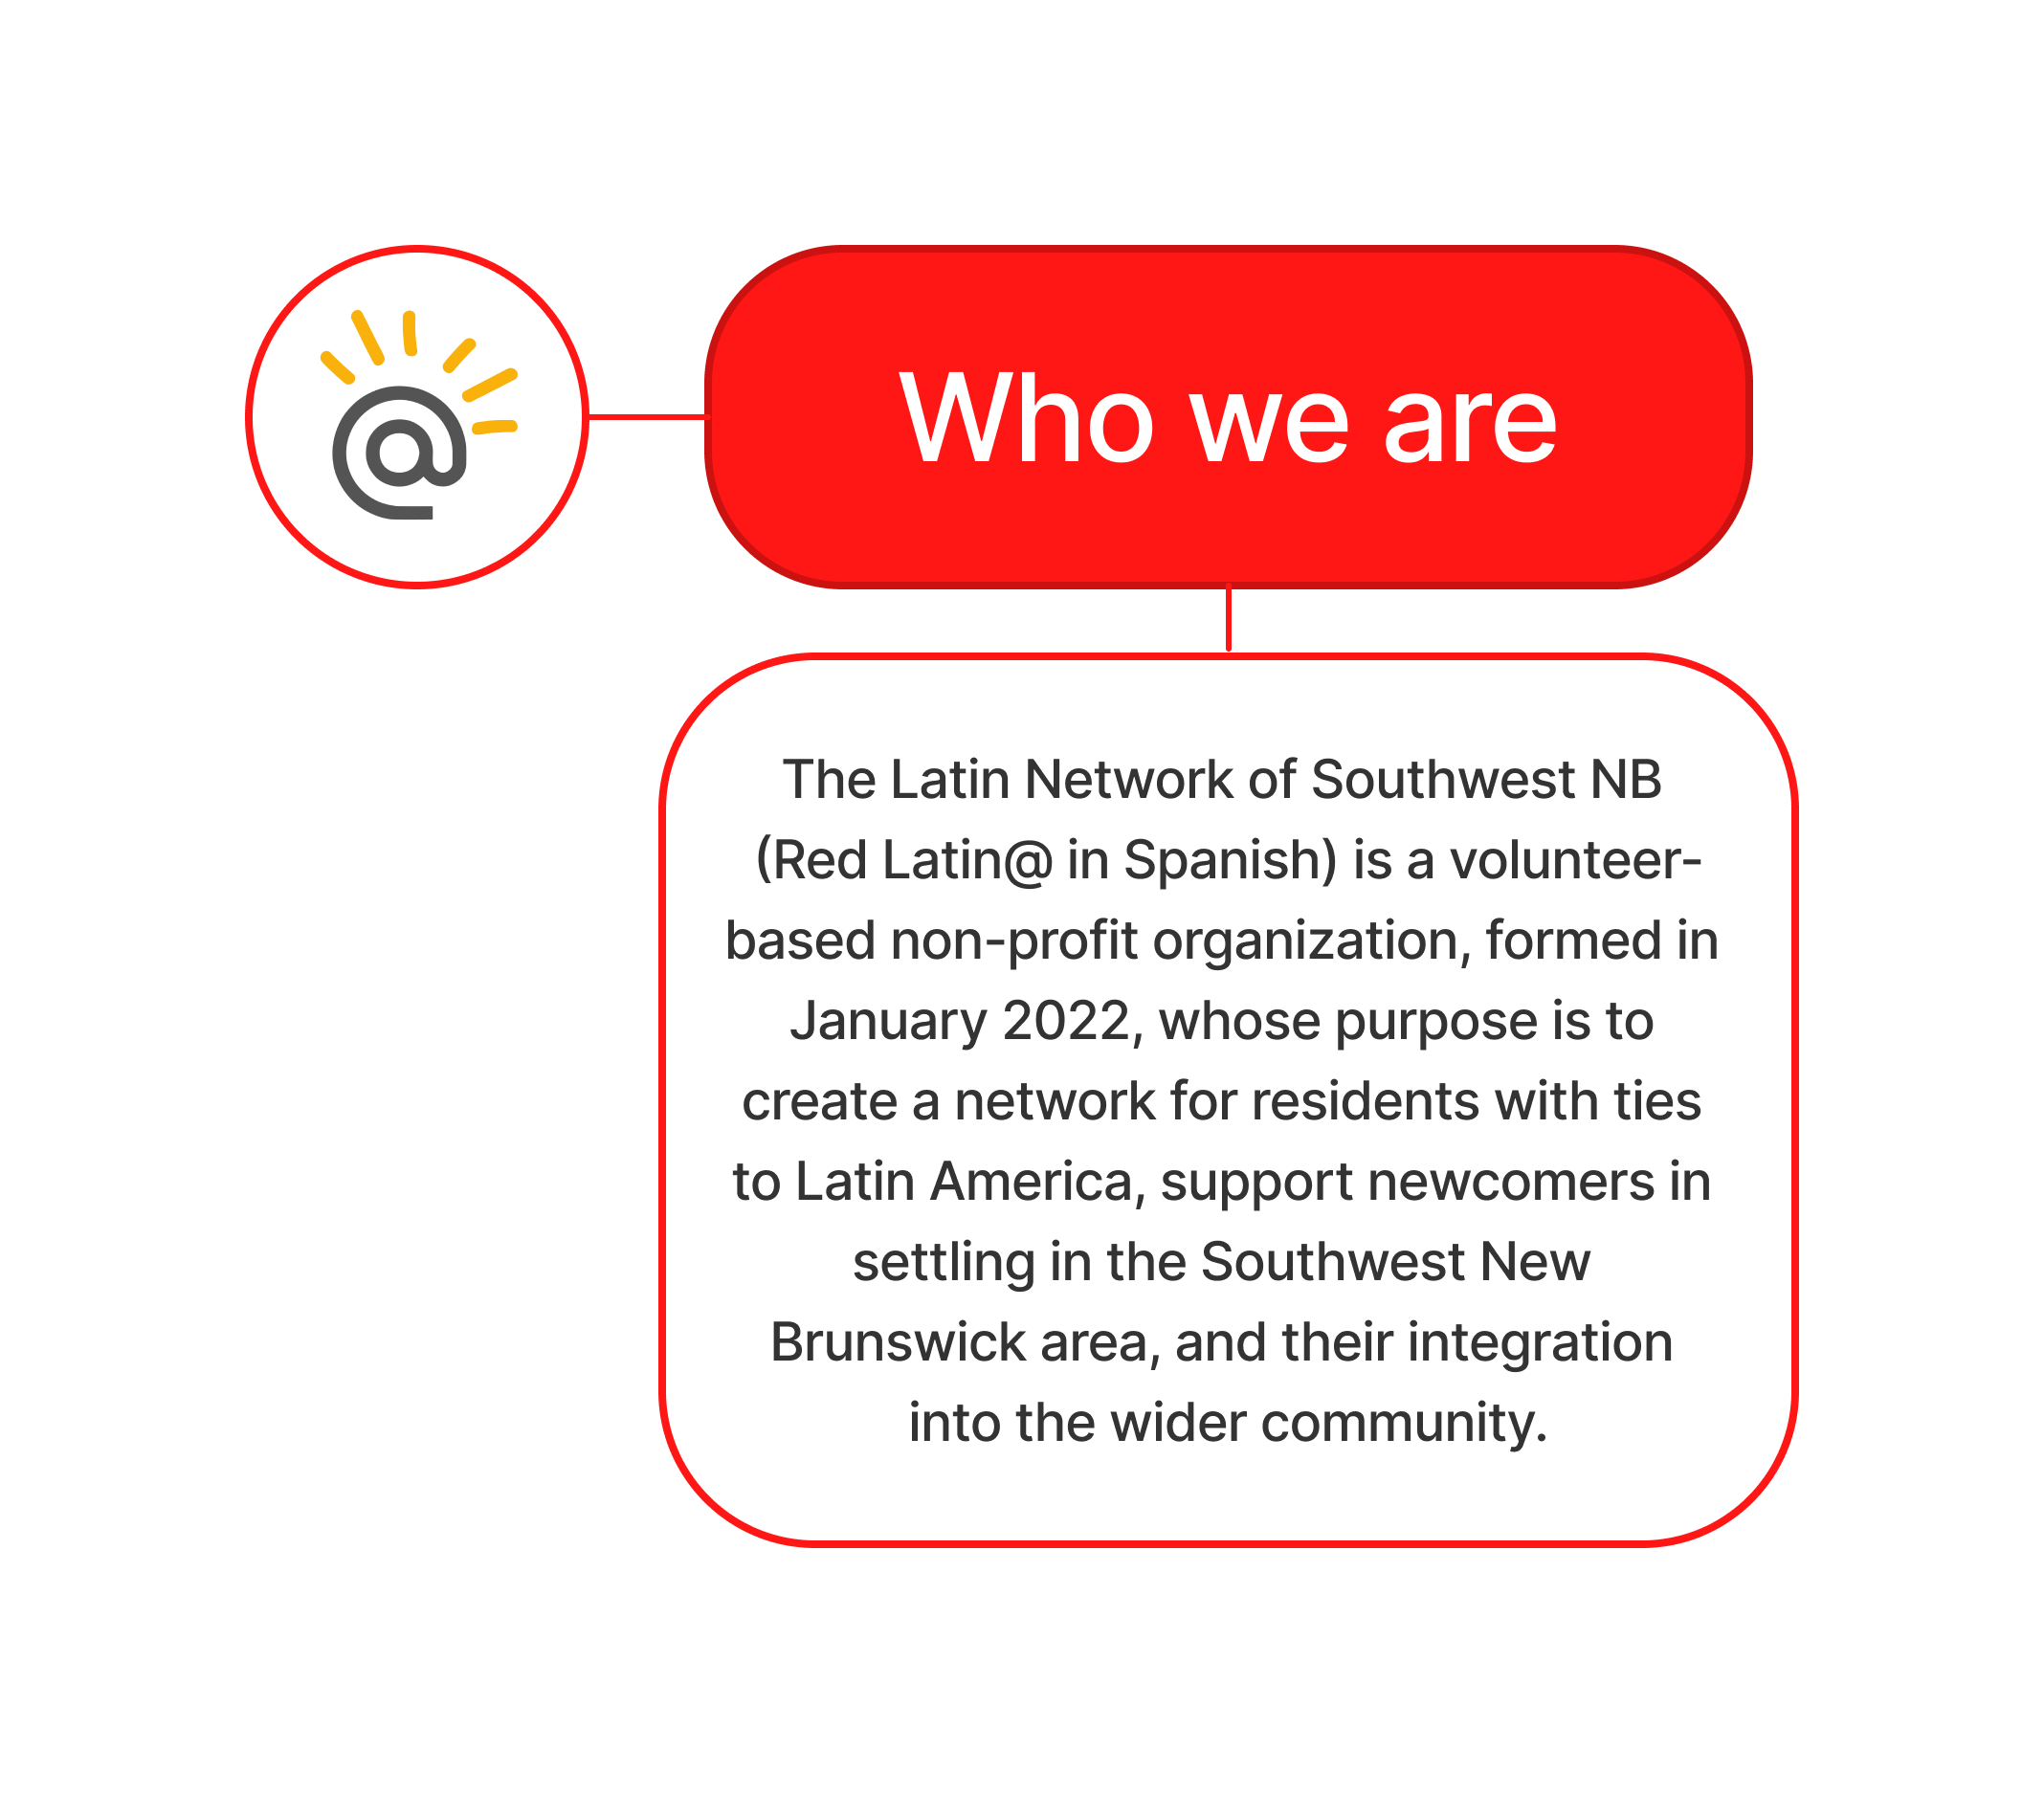 organizarion-who-we-are